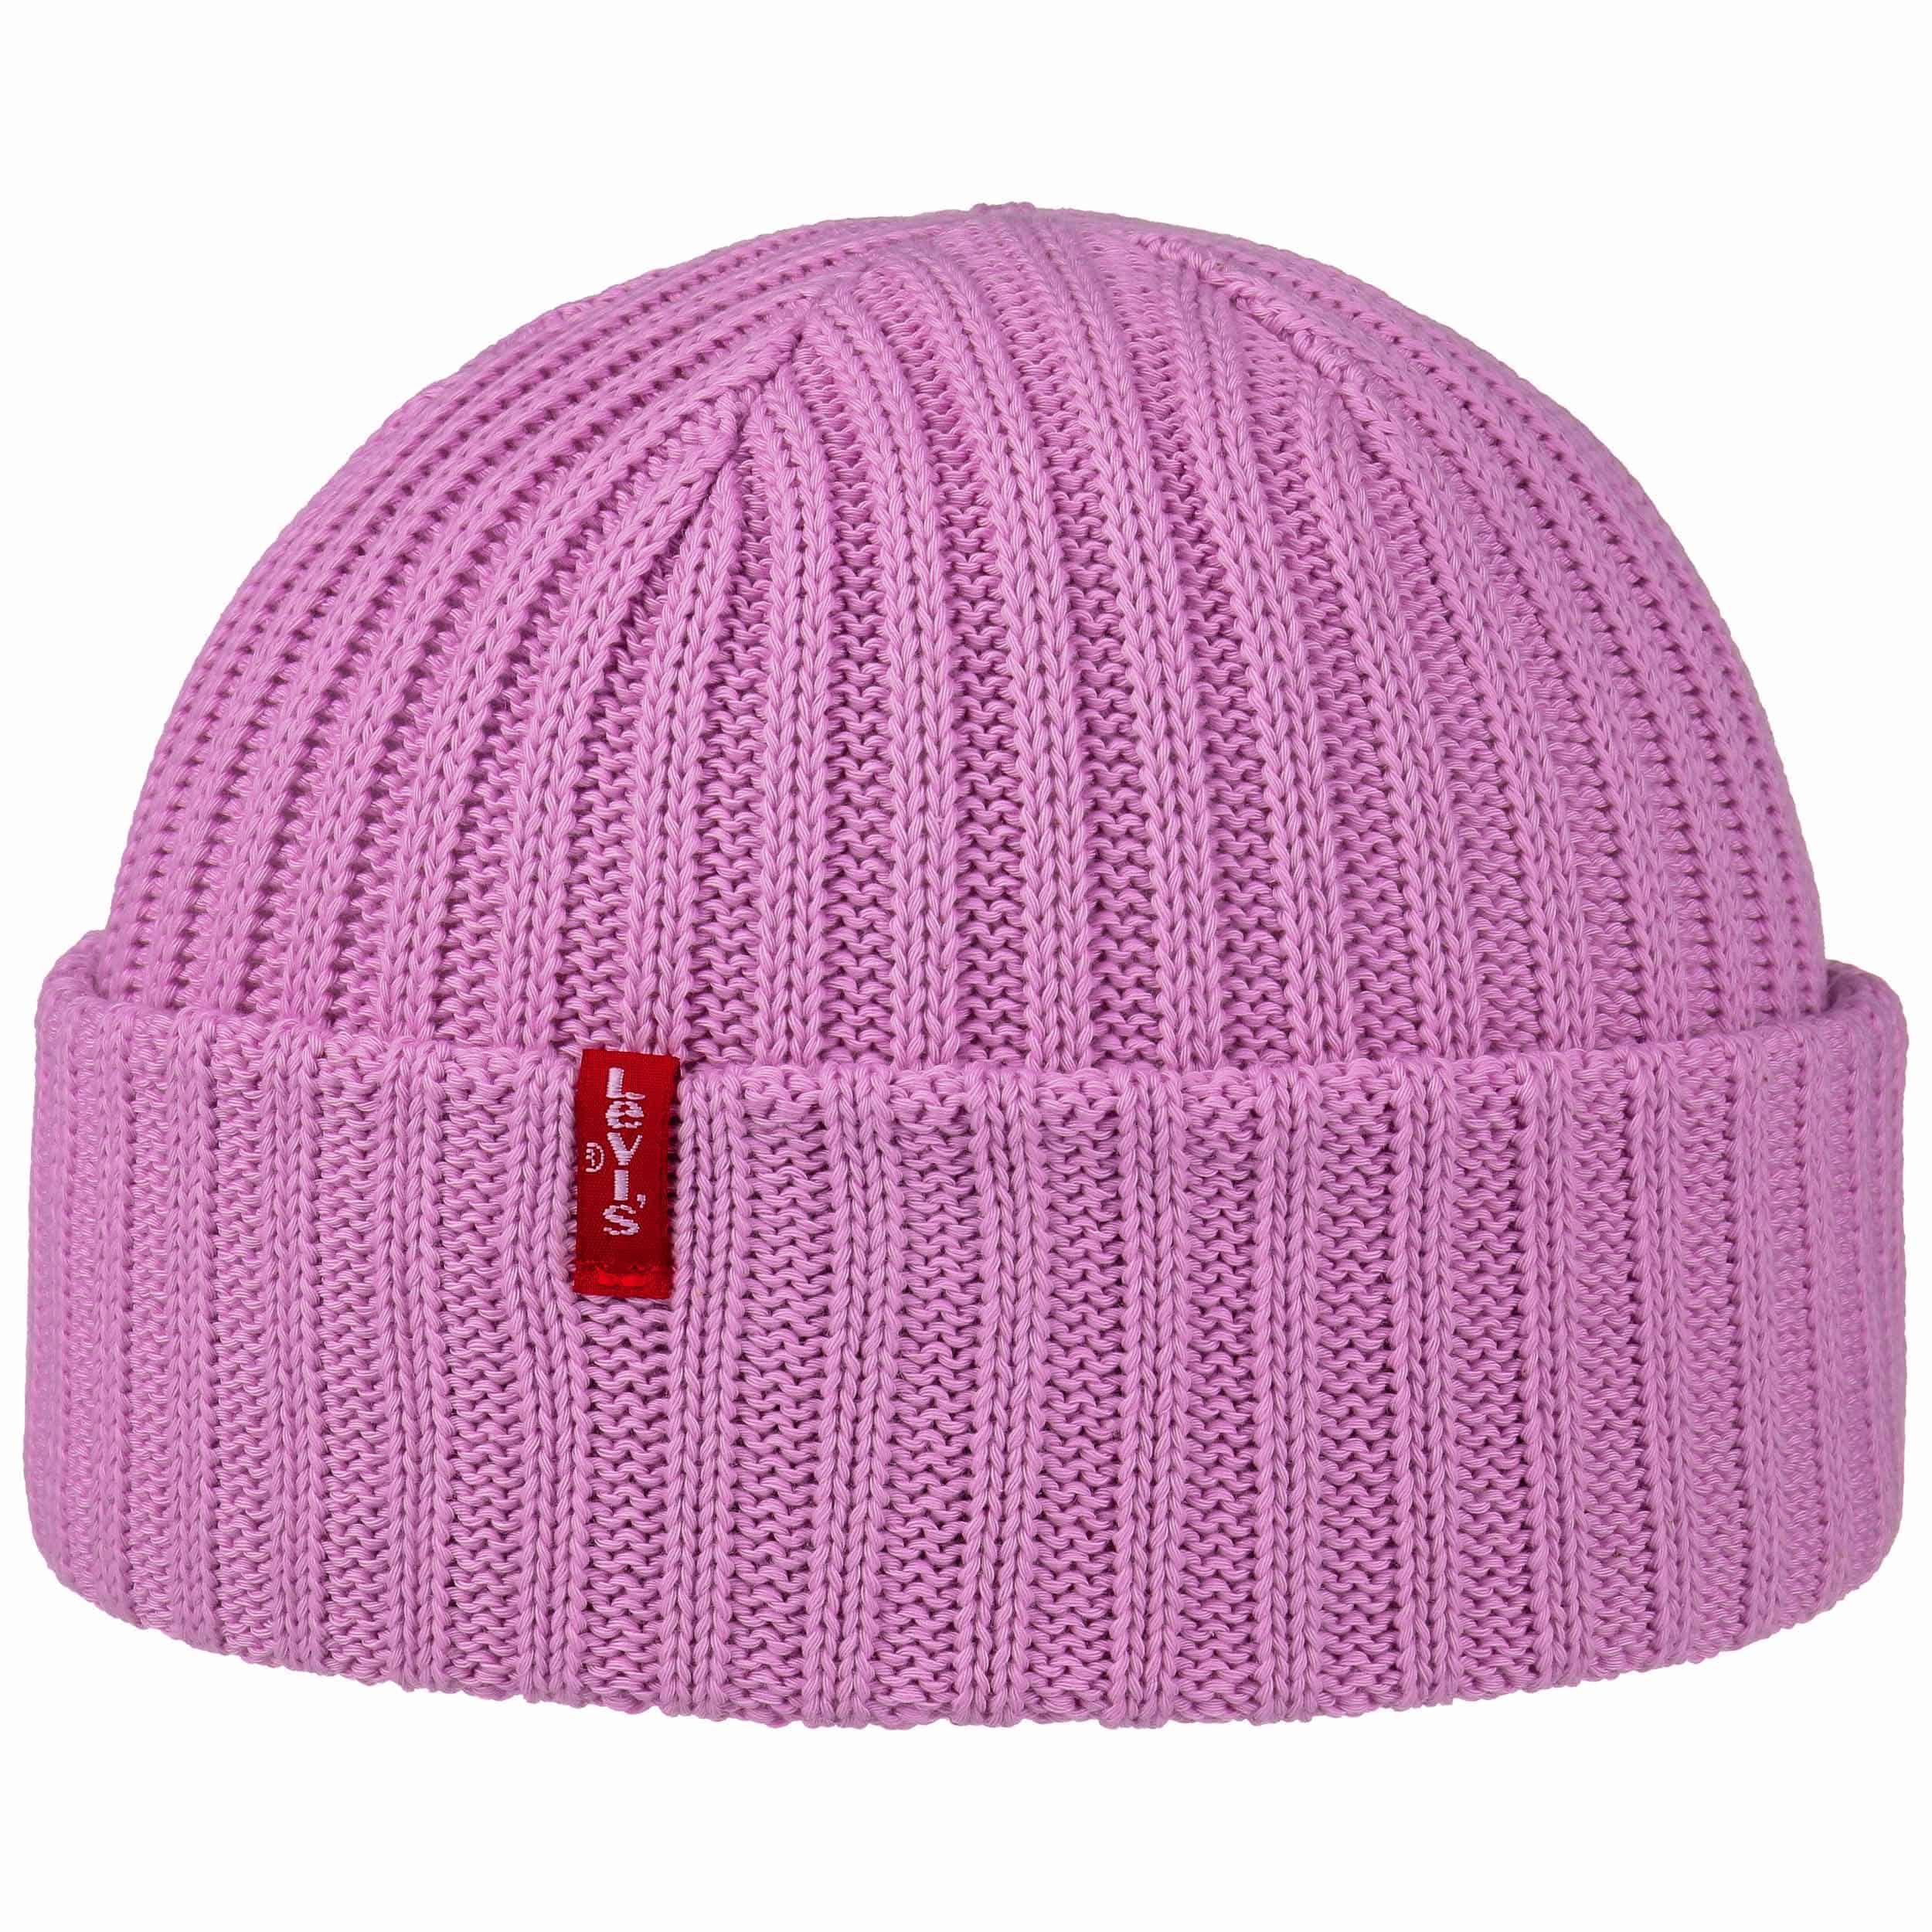 Ribbed Cotton Beanie Hat by Levi´s - 27,95 £